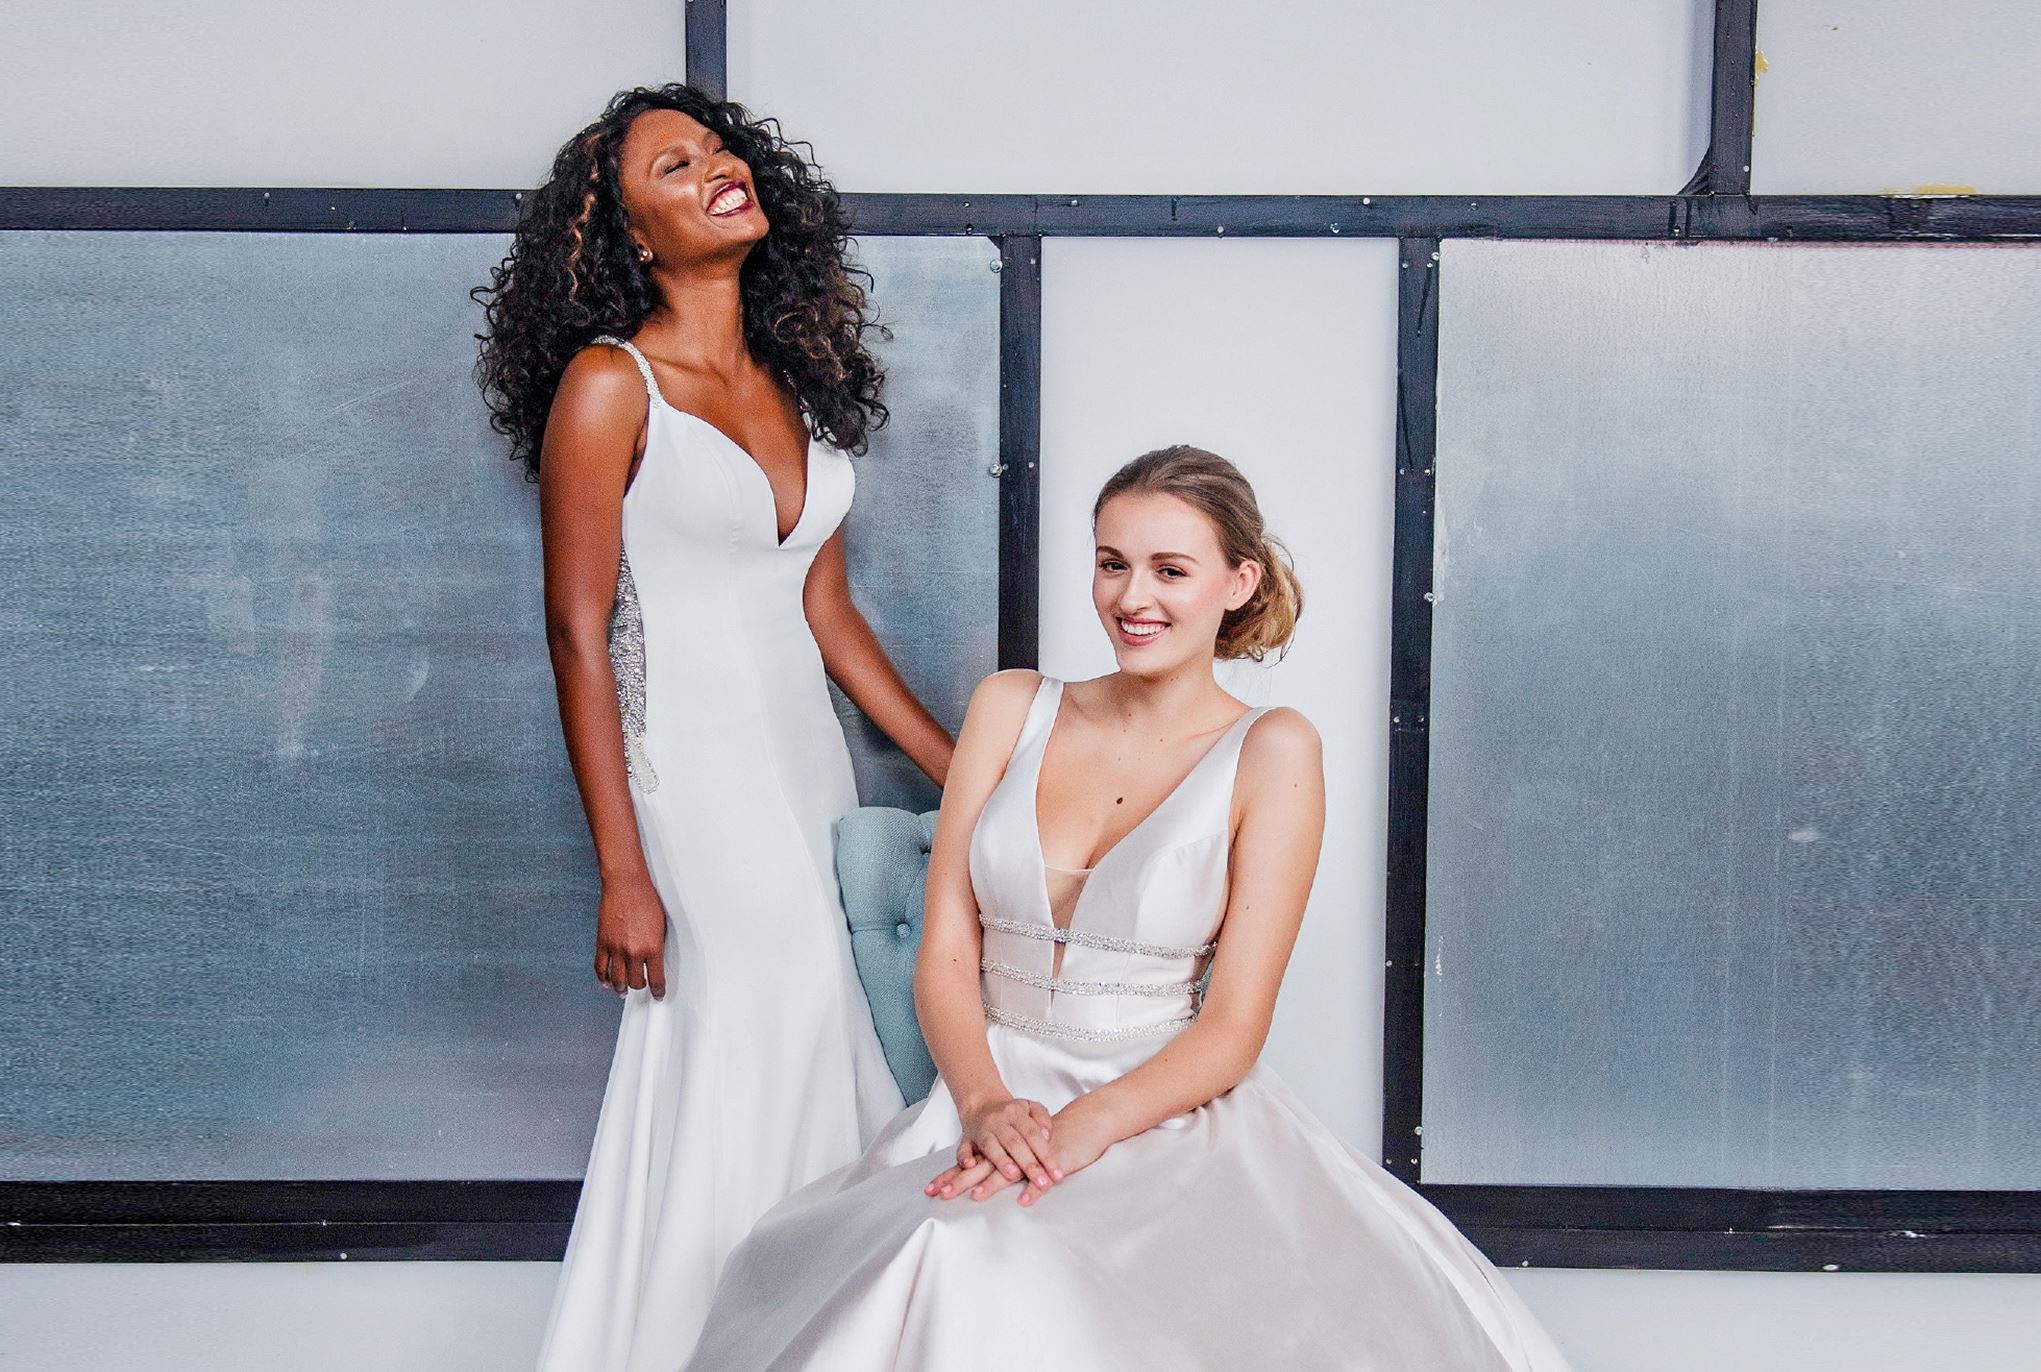 brides in gorgeous, off the rack wedding dresses from here and now bridal in virginia beach